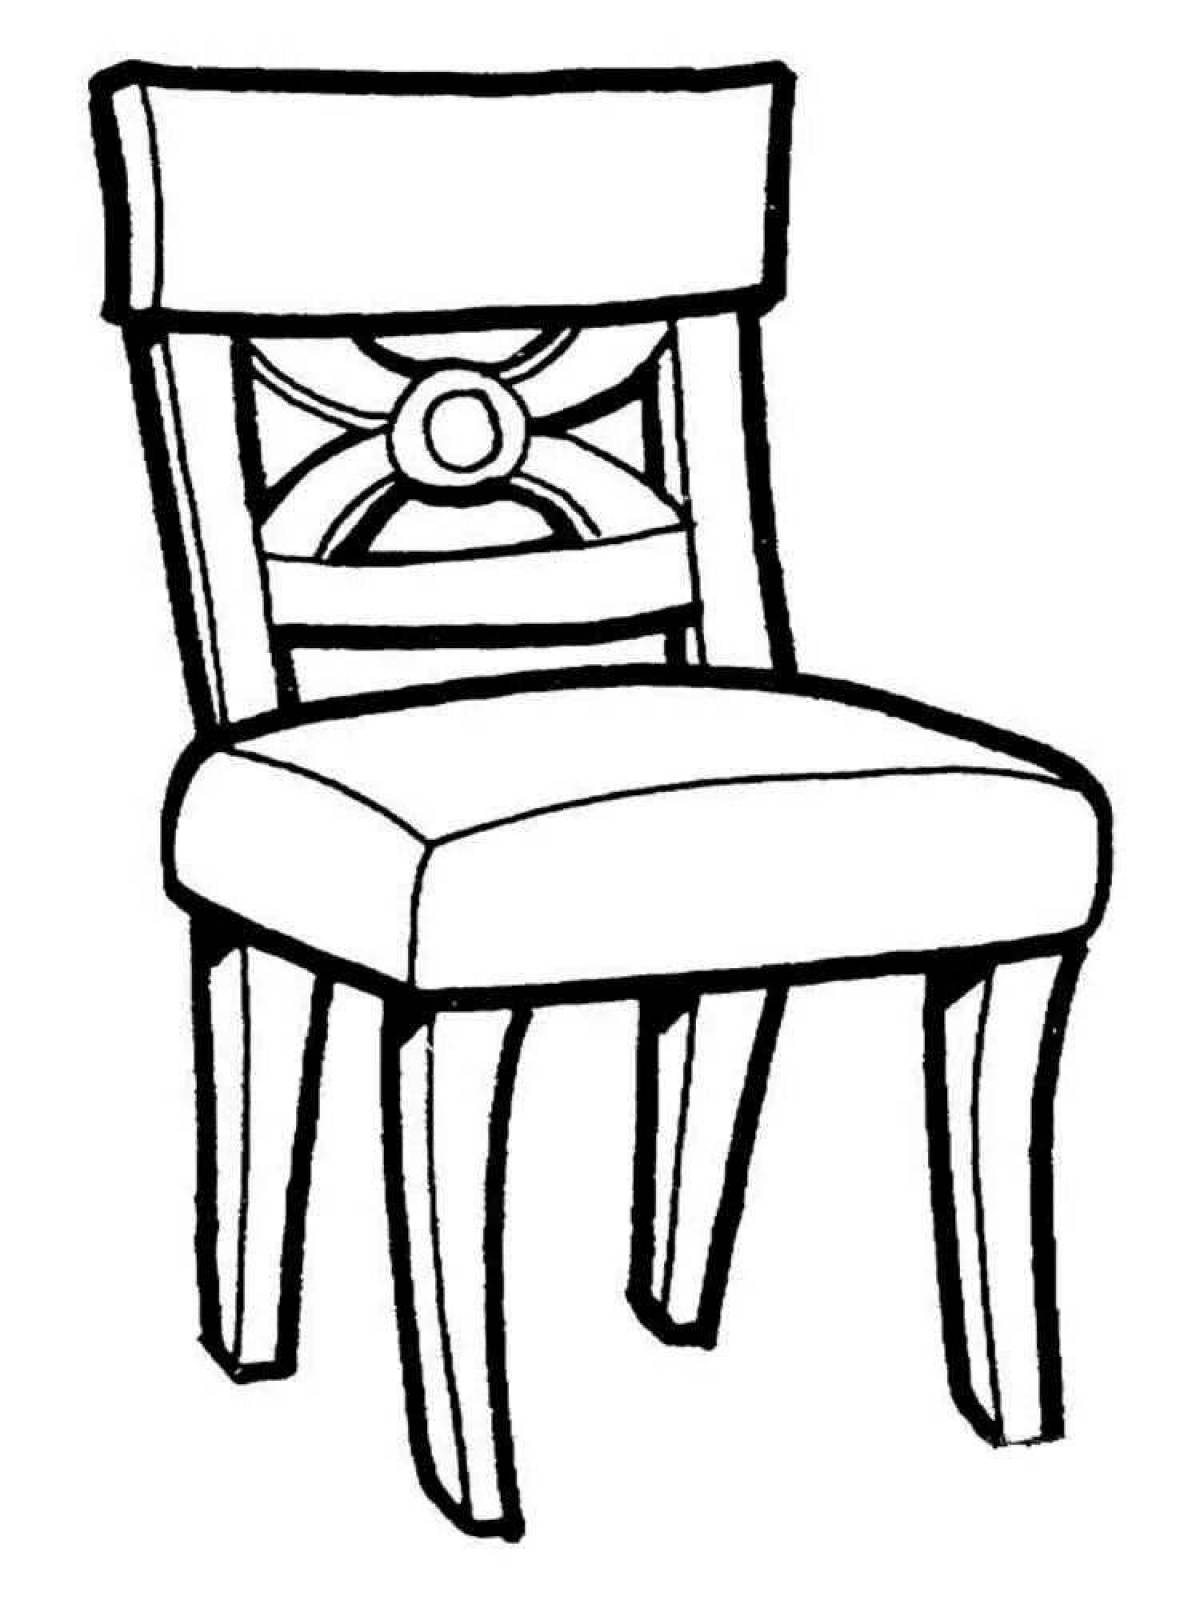 Impressive chair coloring page for kids